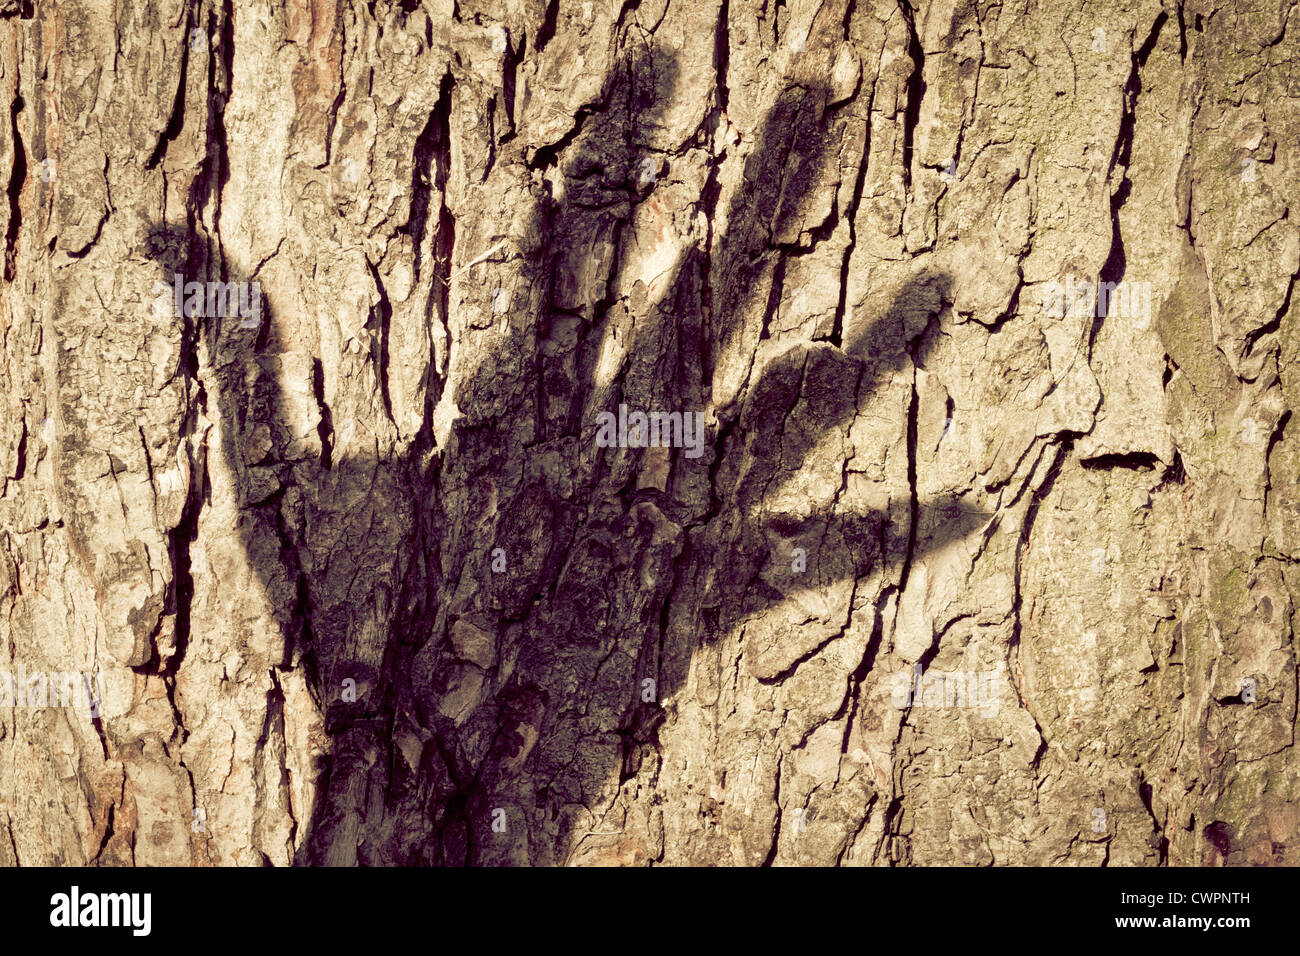 hand shadow on a tree trunk Stock Photo